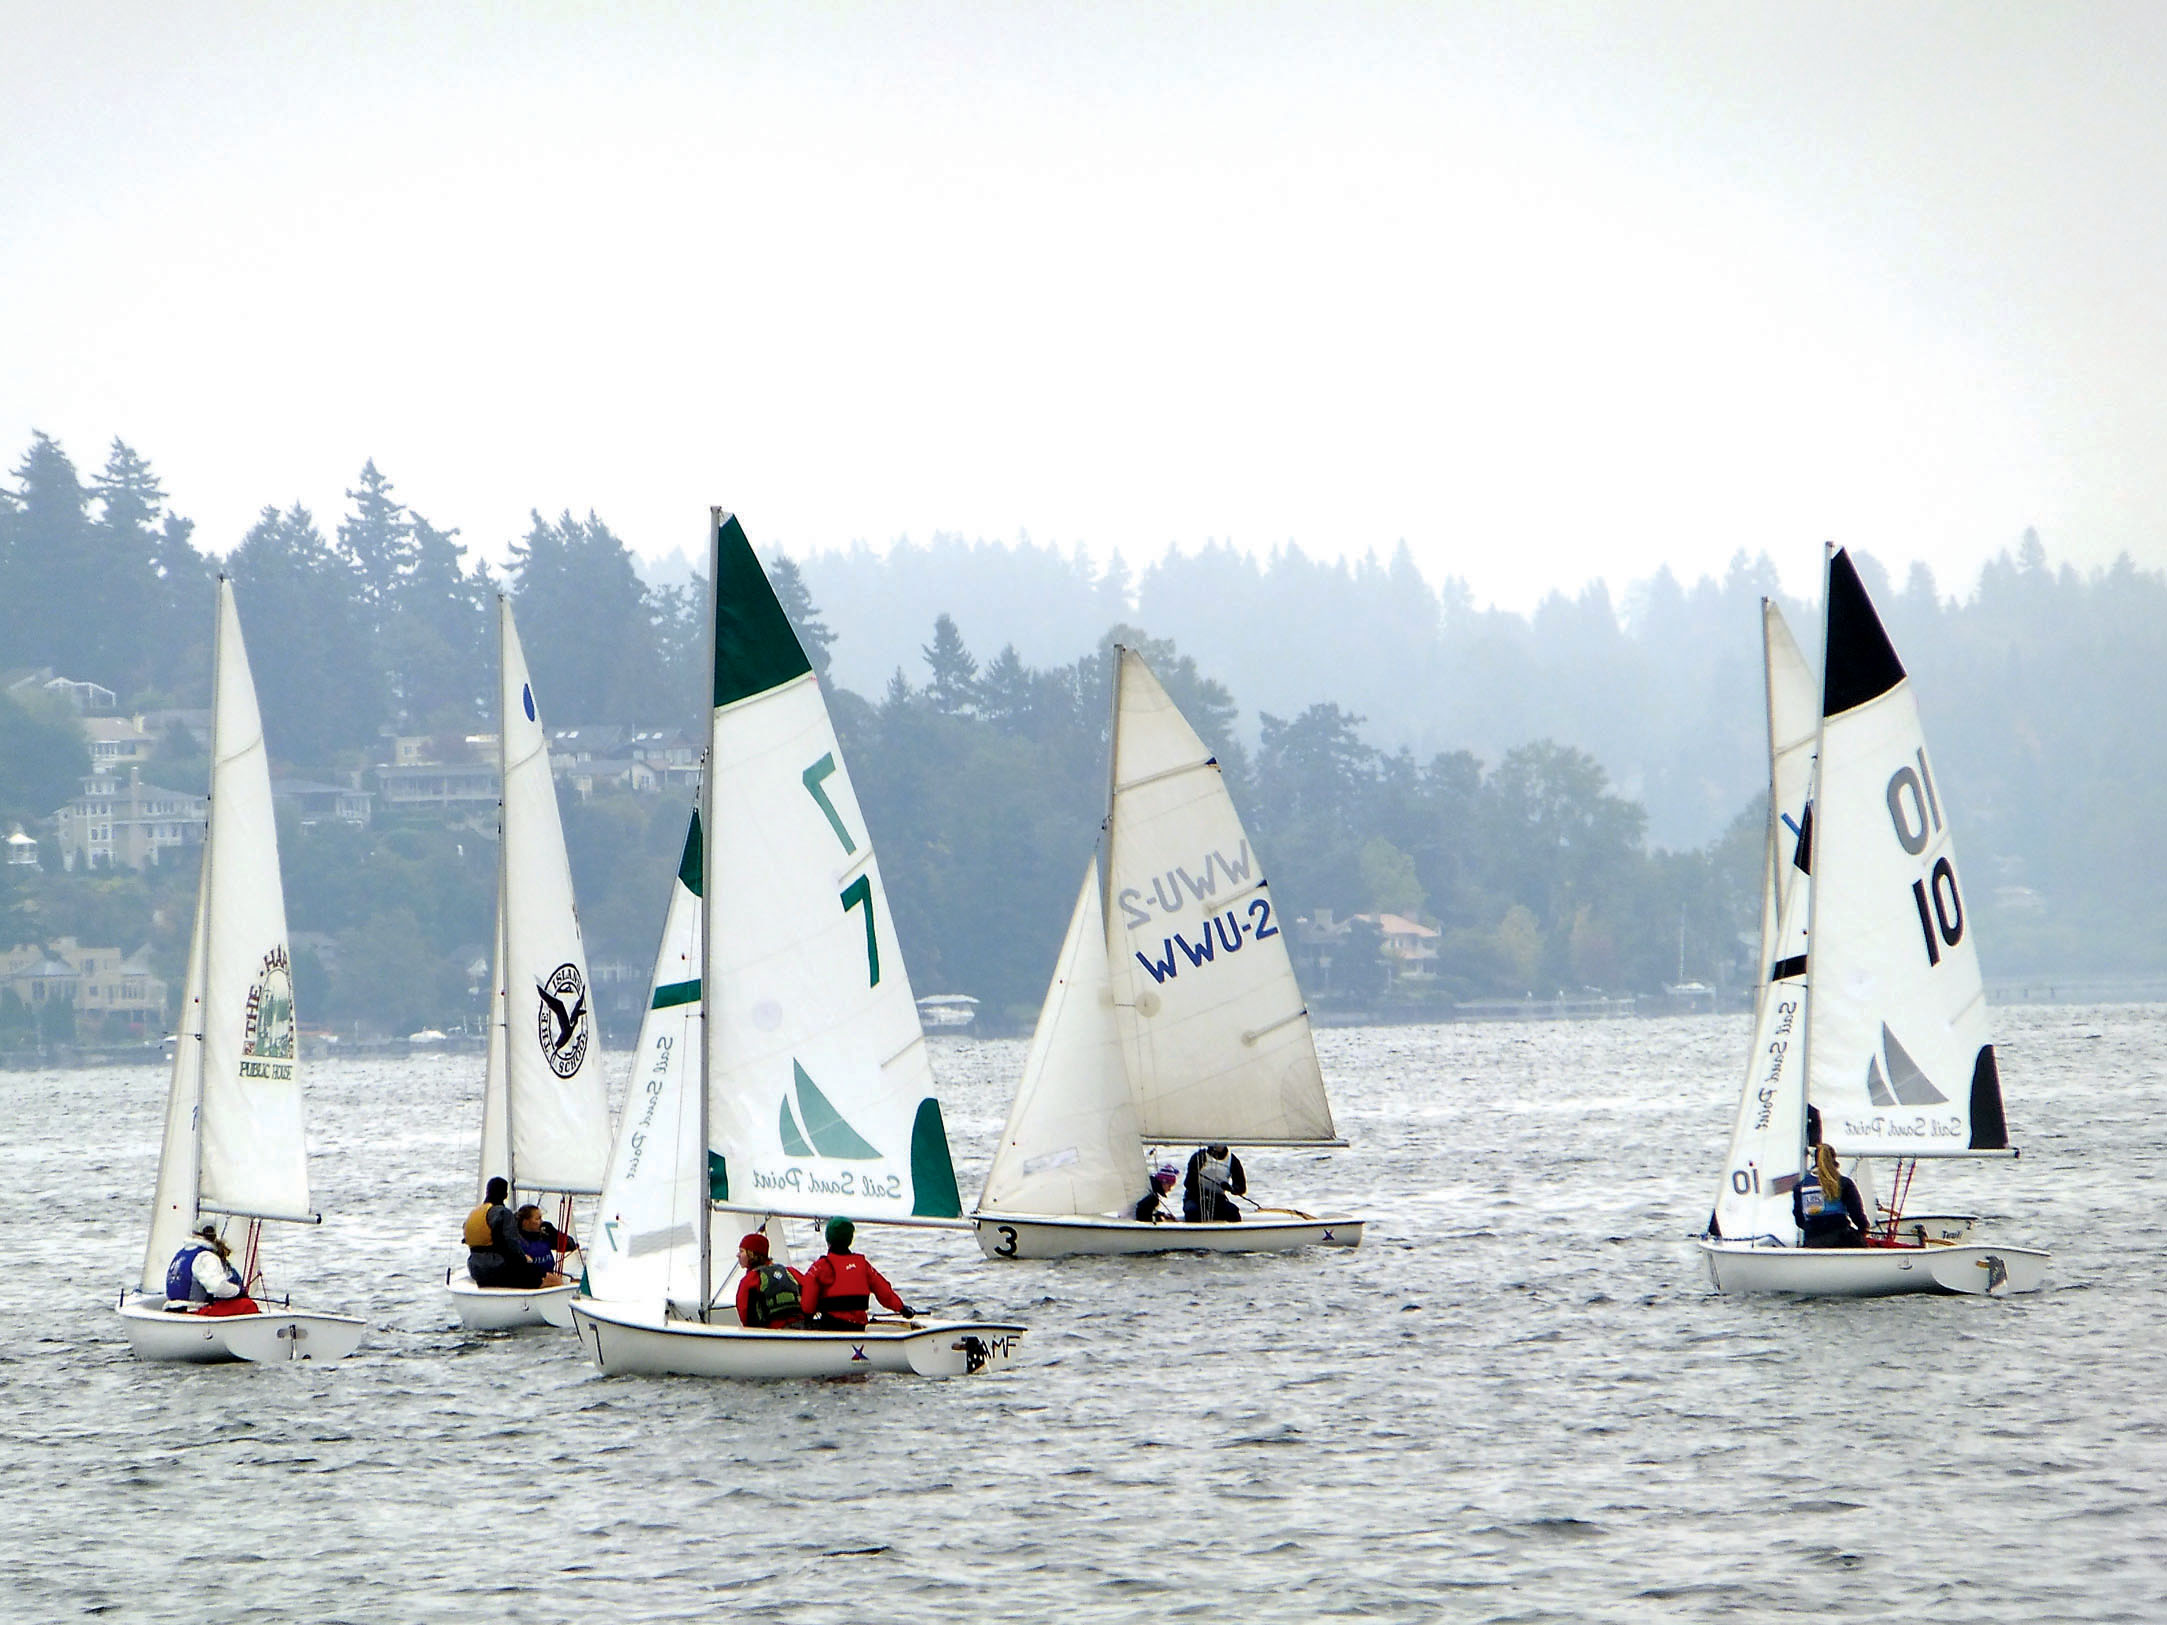 Port Angeles High School sailors compete in a regatta. They will be joined by high school sailors from throughout the state in Port Angeles Harbor on Saturday. Grant Shogren